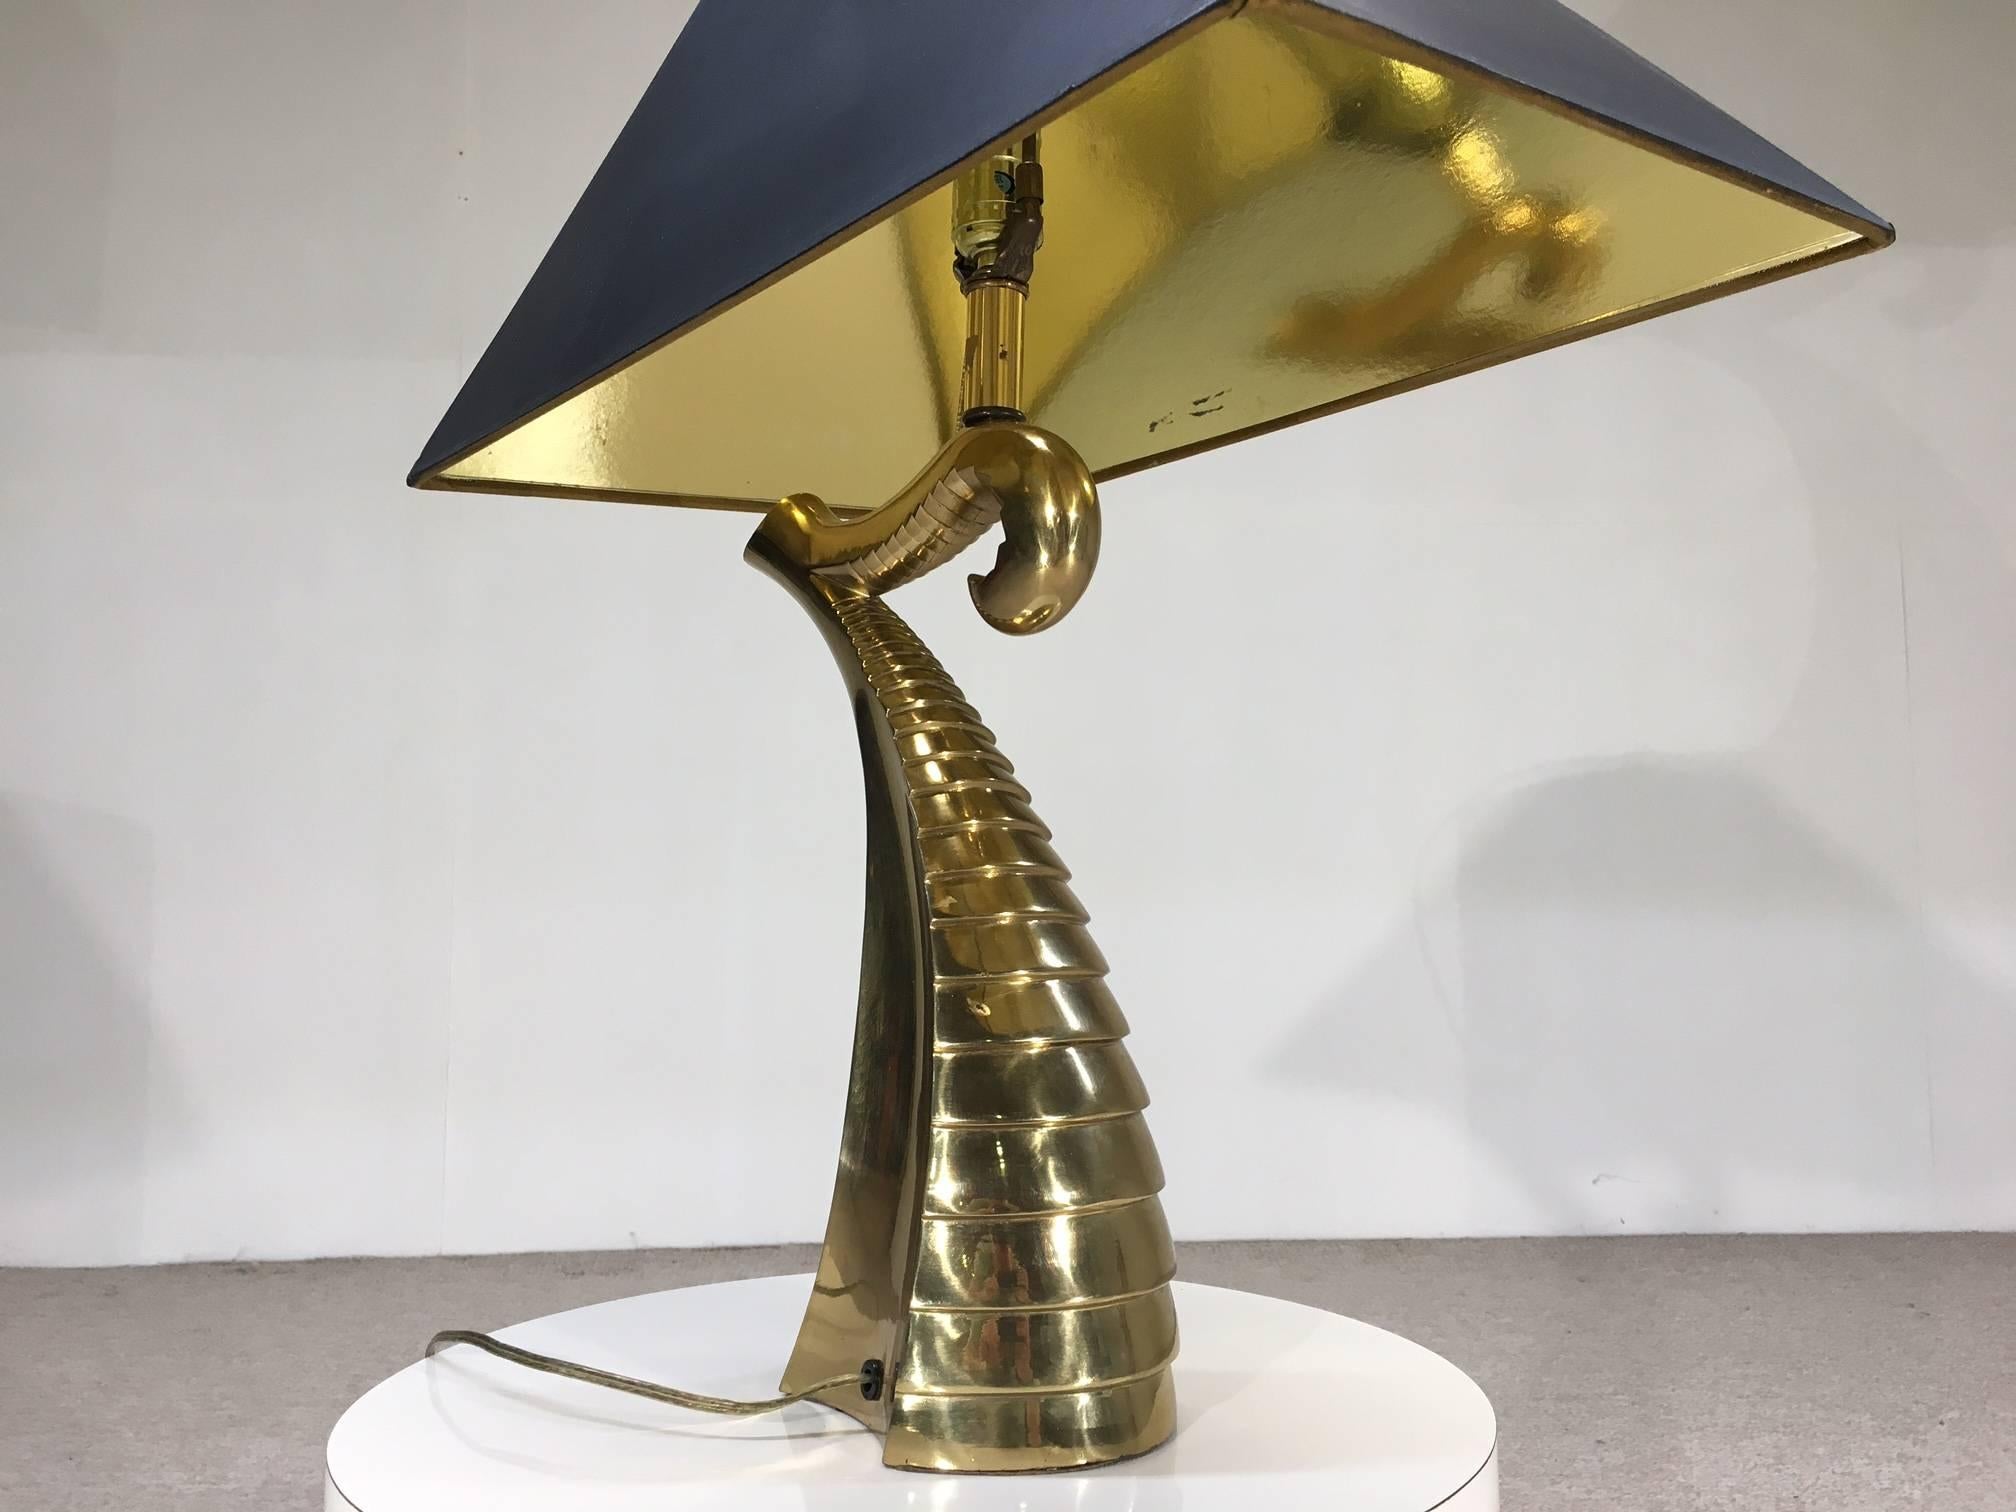 A stunning brass sculptural lamp circa 1970 having a dragon tentacle or Kracken arm base and gold interior shade. Designer or creator is unknown but resembles the work of Philippe Jean of France and Pierre Cardin. 

Sculpture dimensions inches: